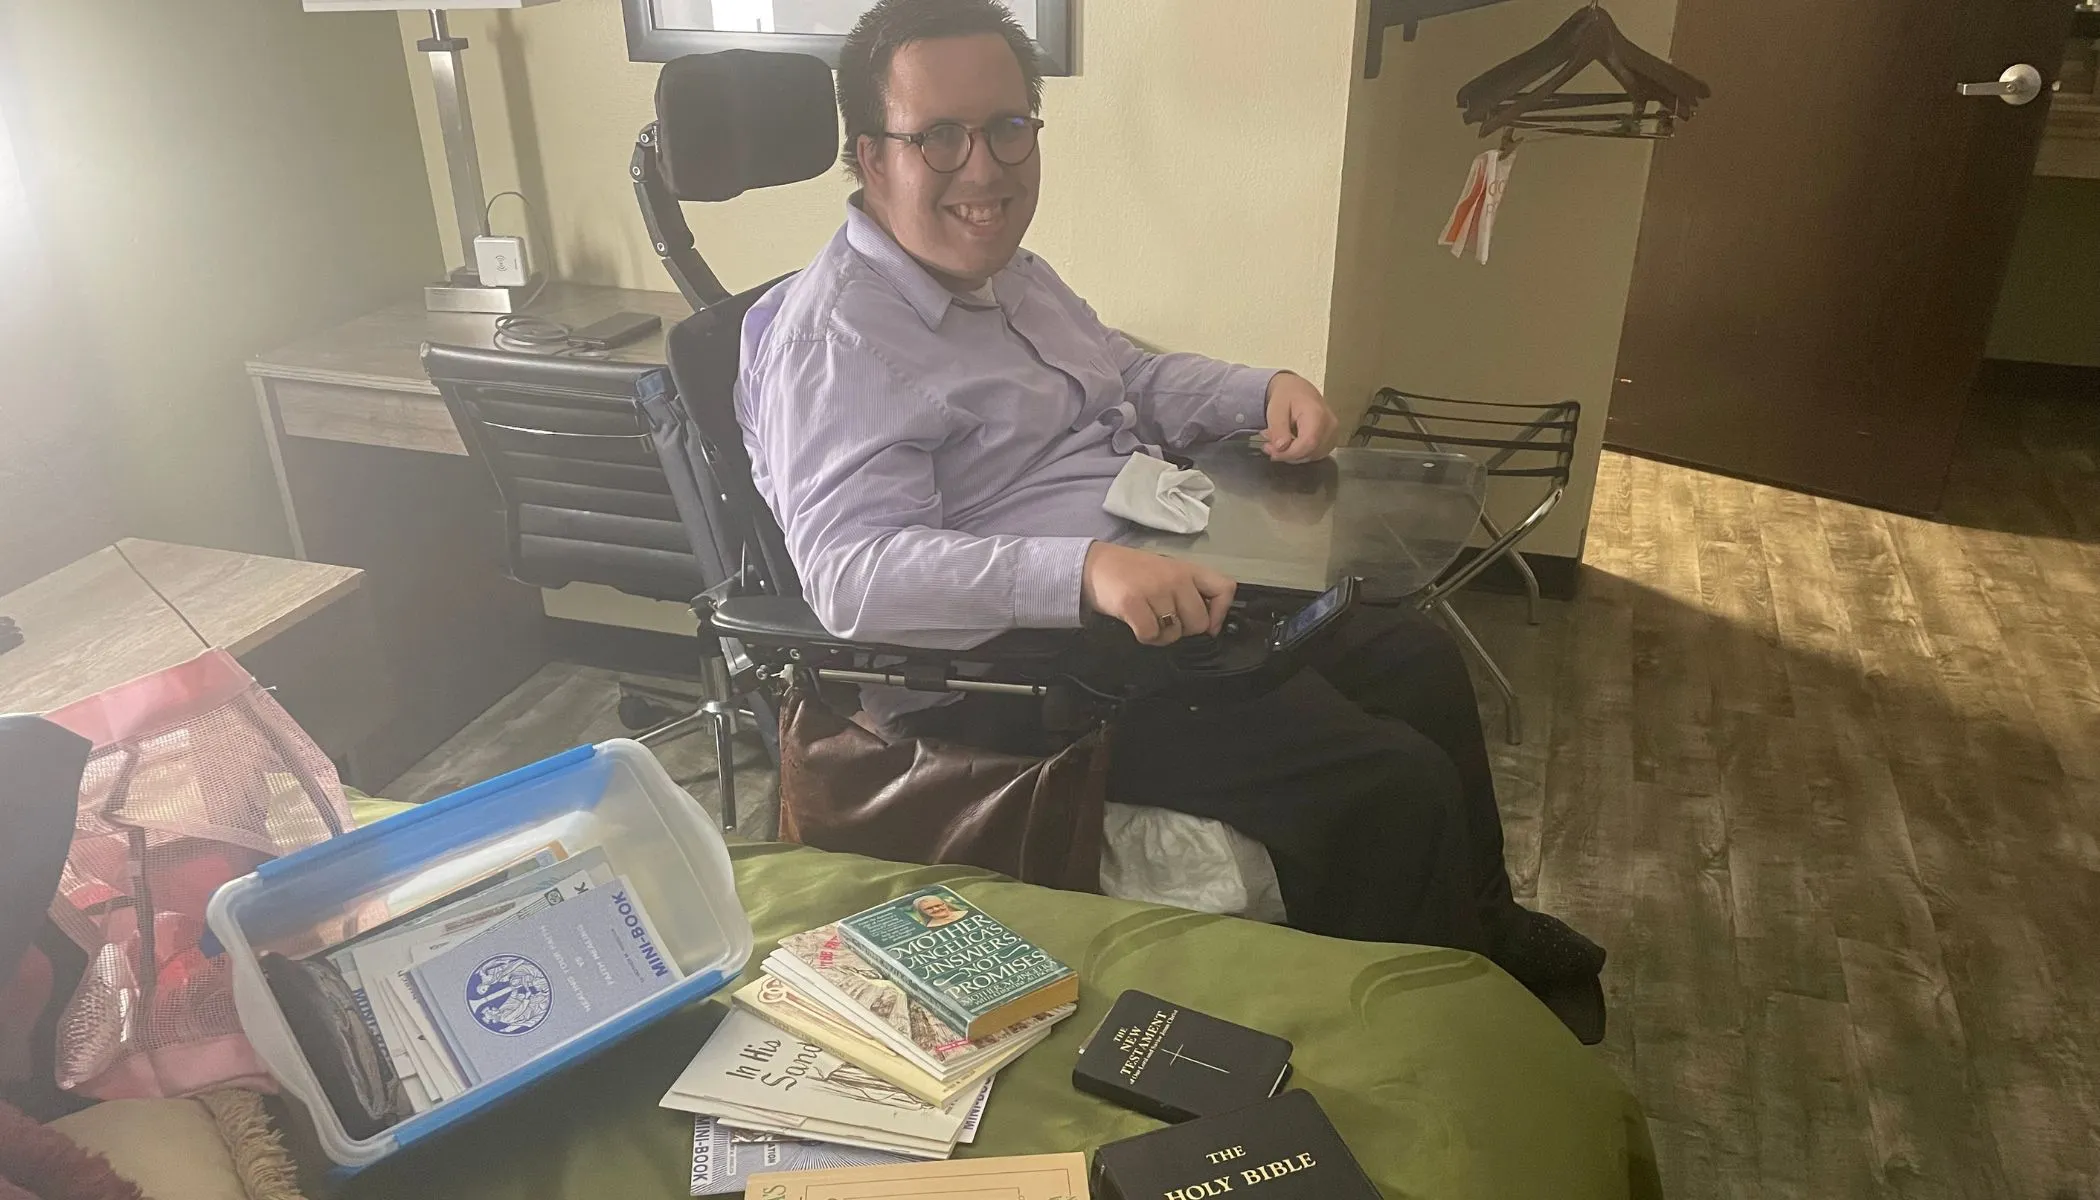 Michael Ham, 33, suffers from a rare form of muscular dystrophy. He wants his last trip to be a visit to the campus of EWTN to say “thank you” to Mother Angelica and to the network for their role in his life.?w=200&h=150